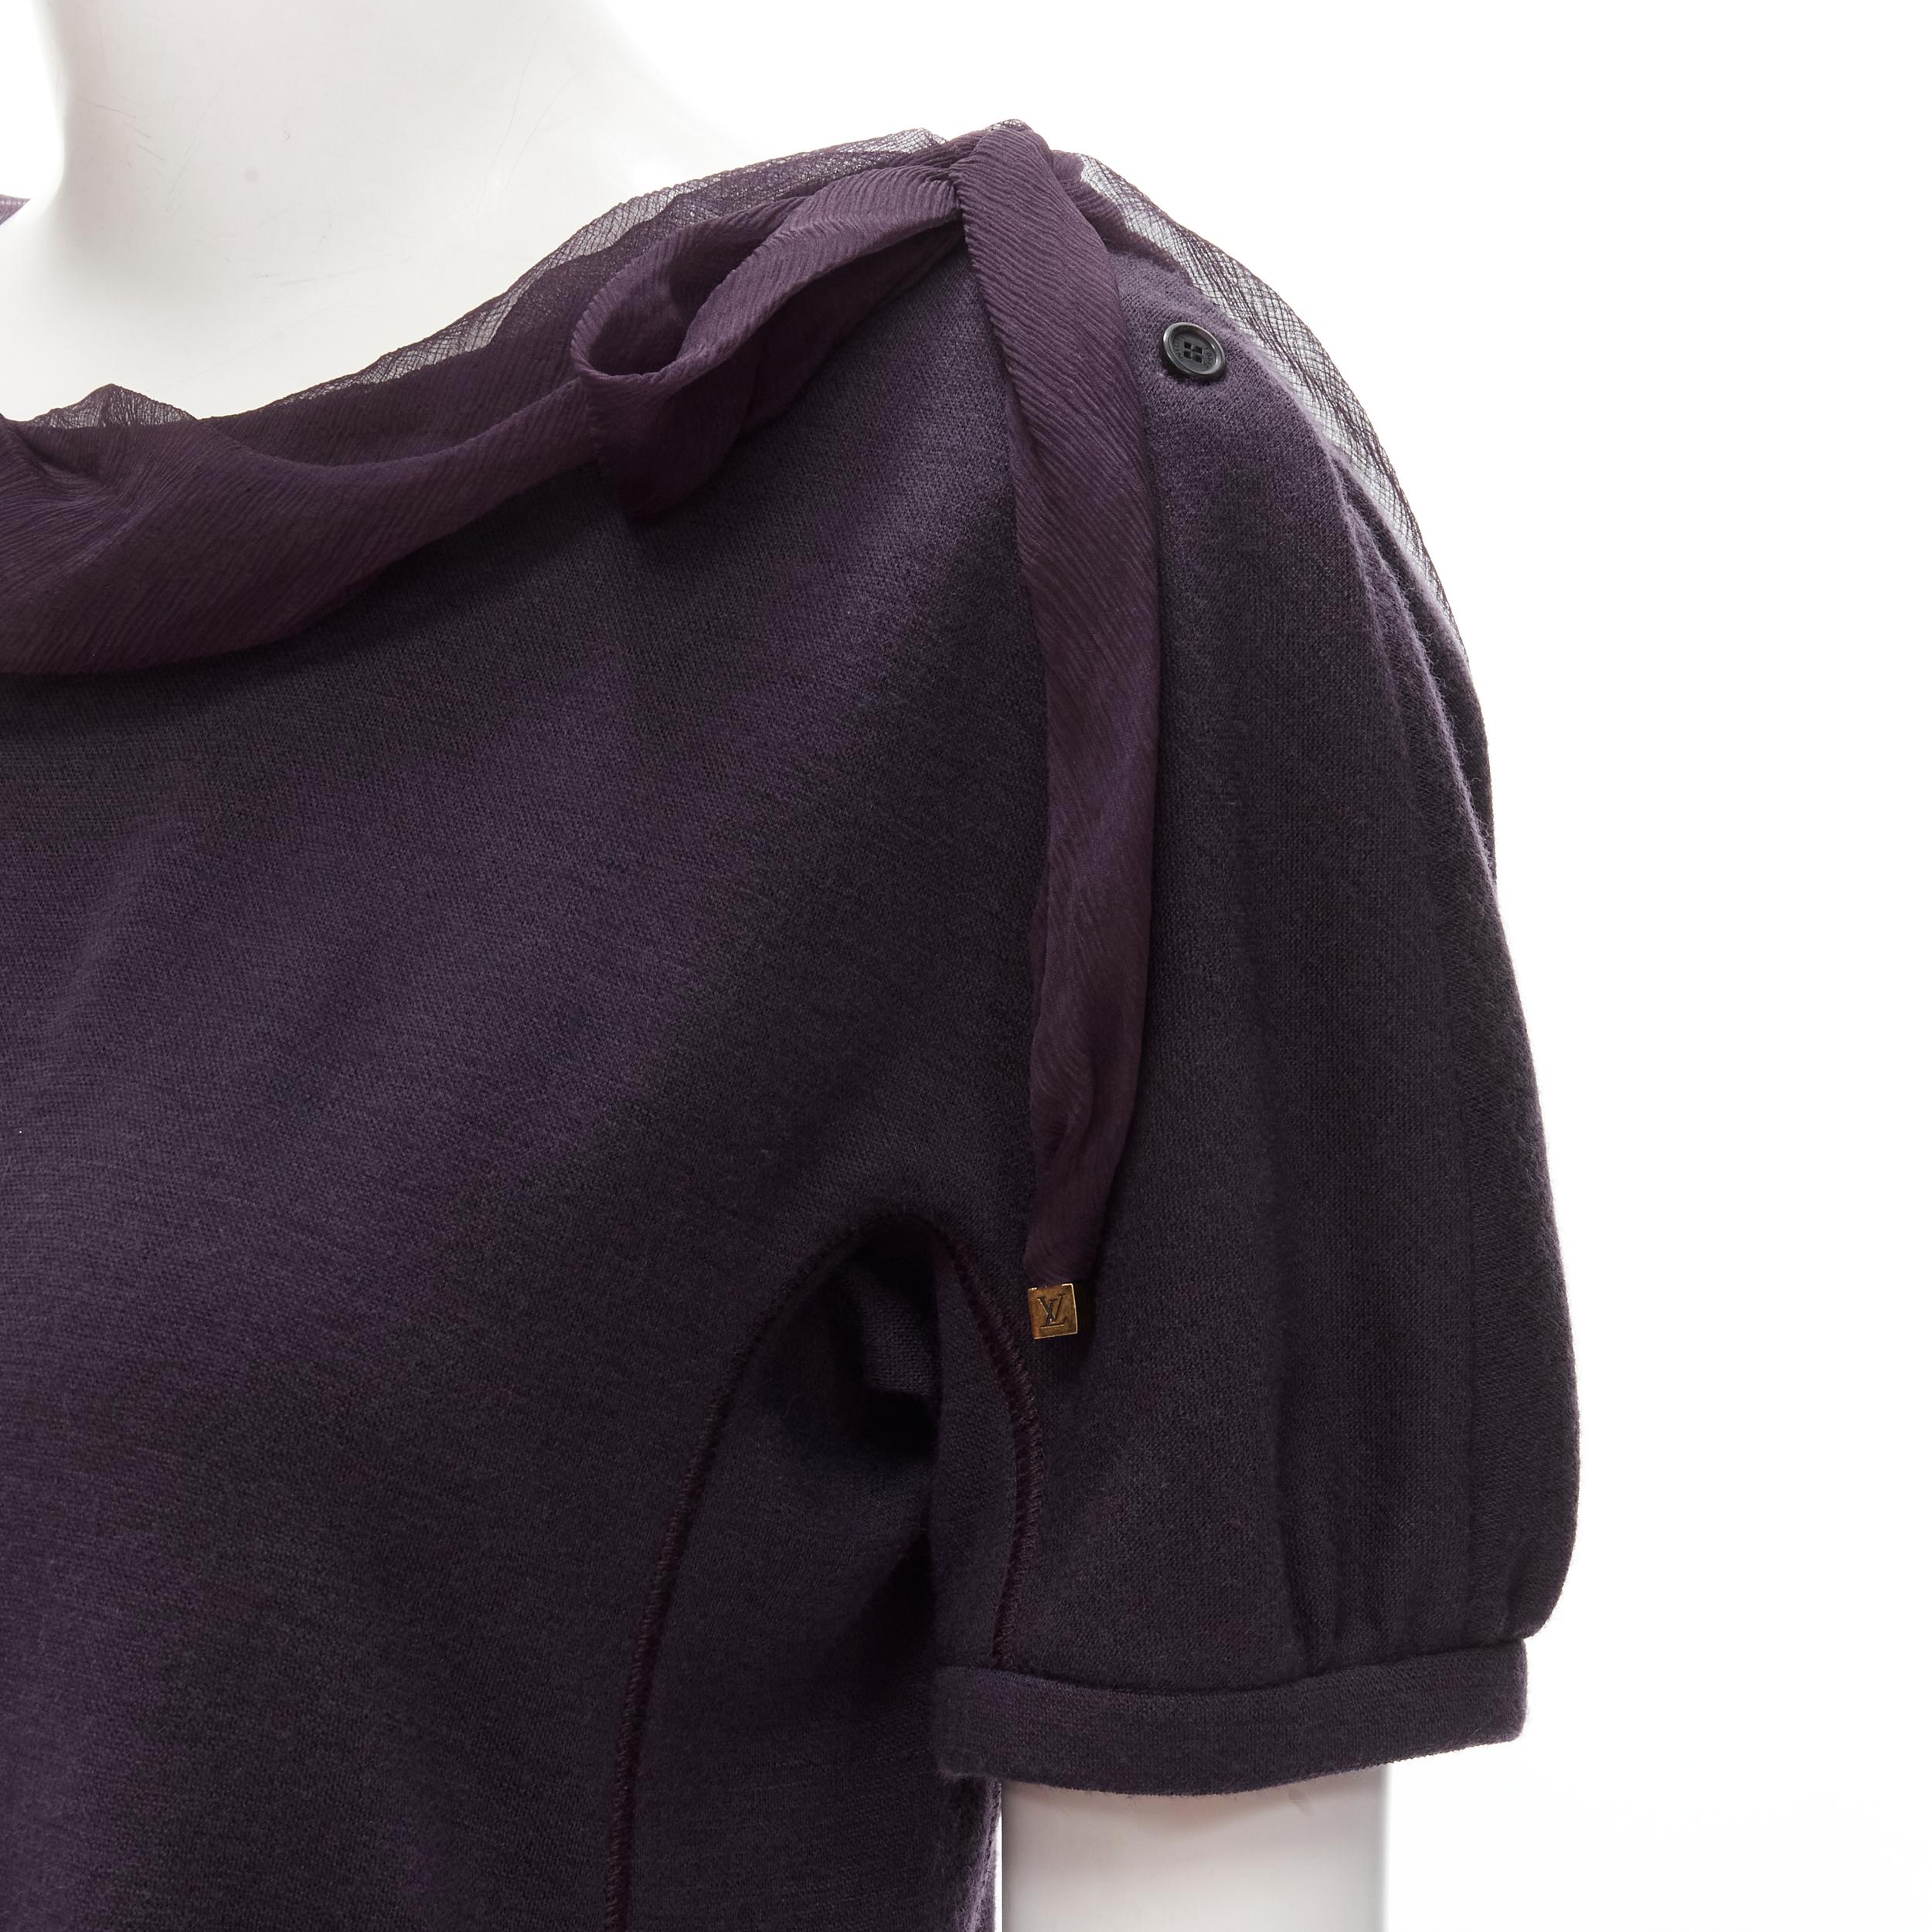 LOUIS VUITTON purple cotton silk trim gold LV cube charm bow boxy pullover top S
Brand: Louis Vuitton
Extra Detail: Silk ruffle trim collar. Button closure along shoulder. Gold-tone LV cube charm at end of silk trim. Overlocking stitching. Boxy